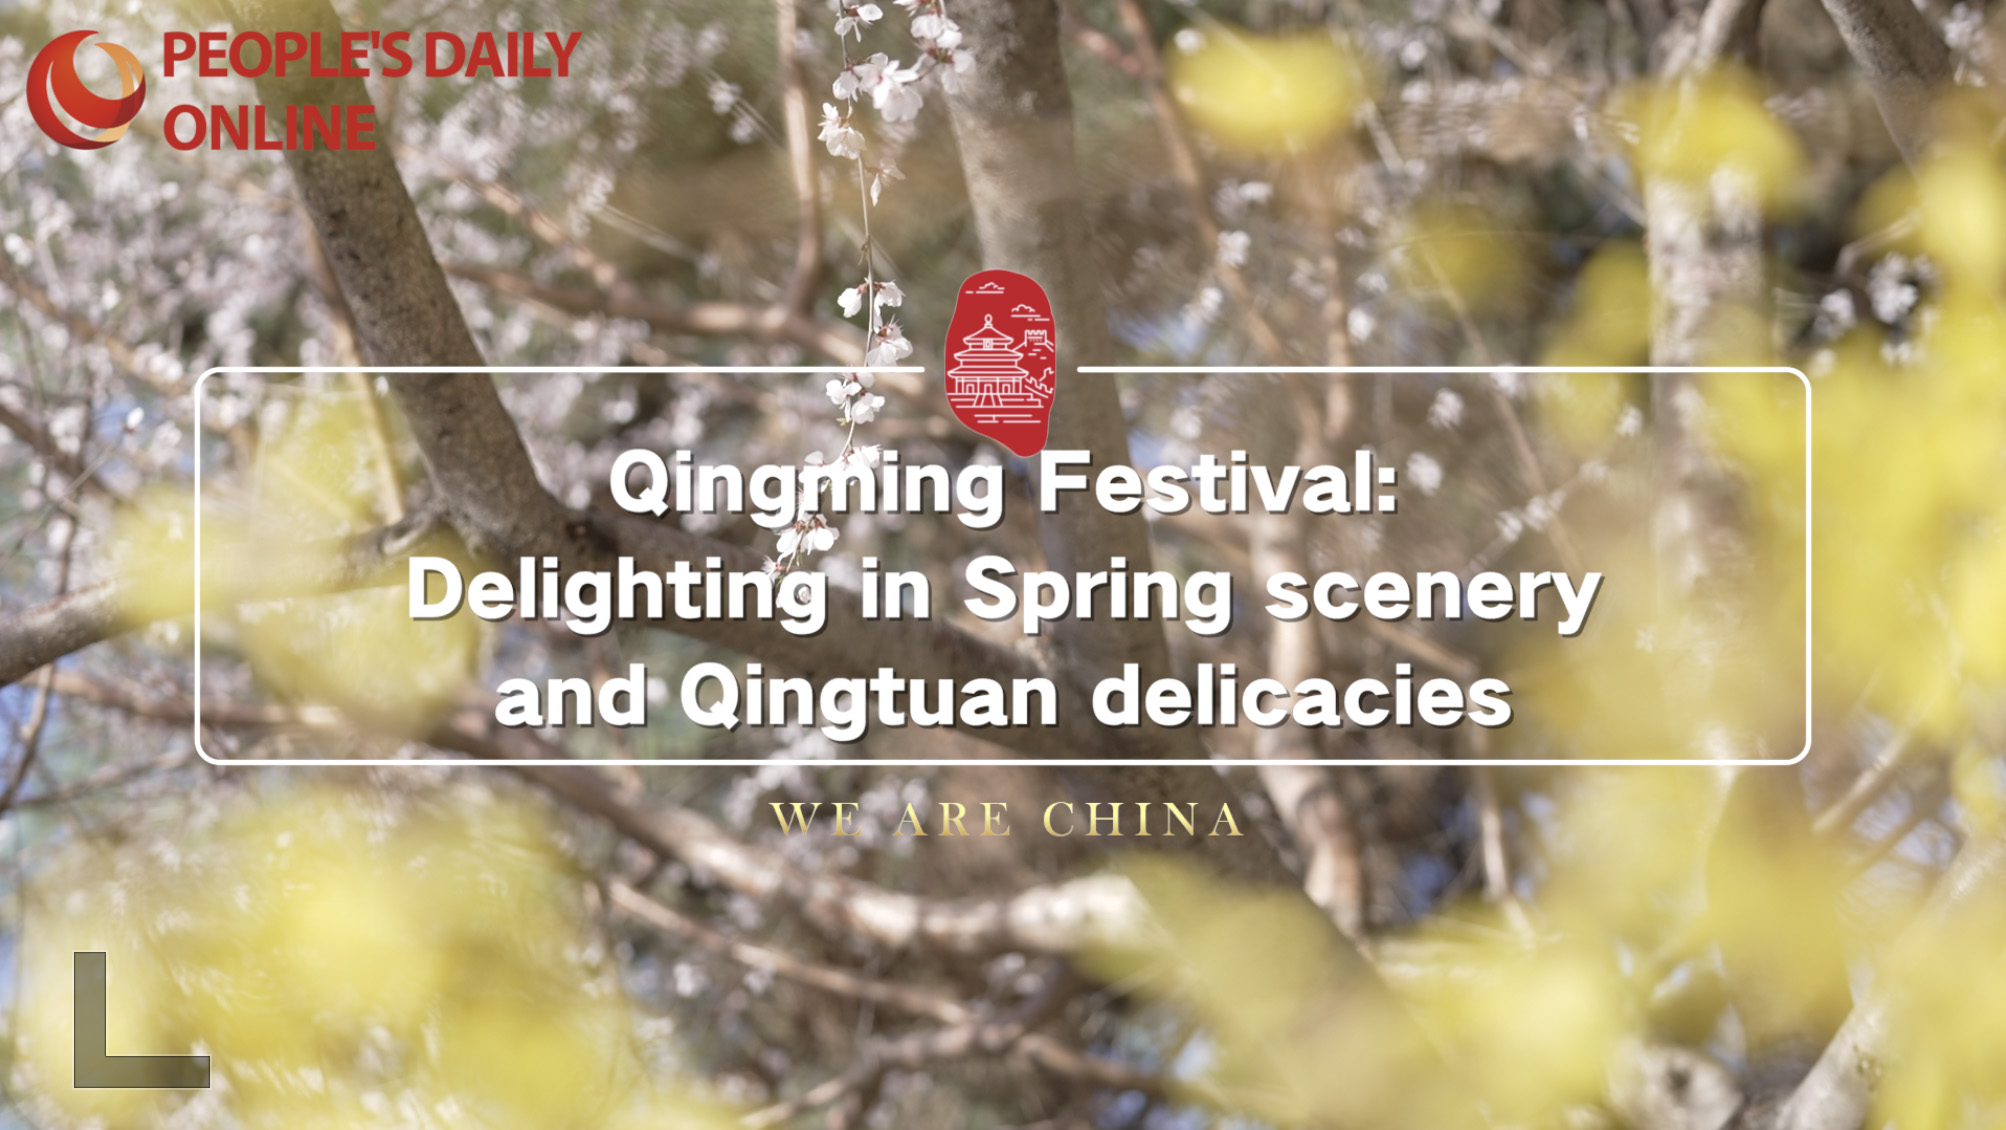 Qingming Festival: Delighting in Spring scenery and Qingtuan delicacies